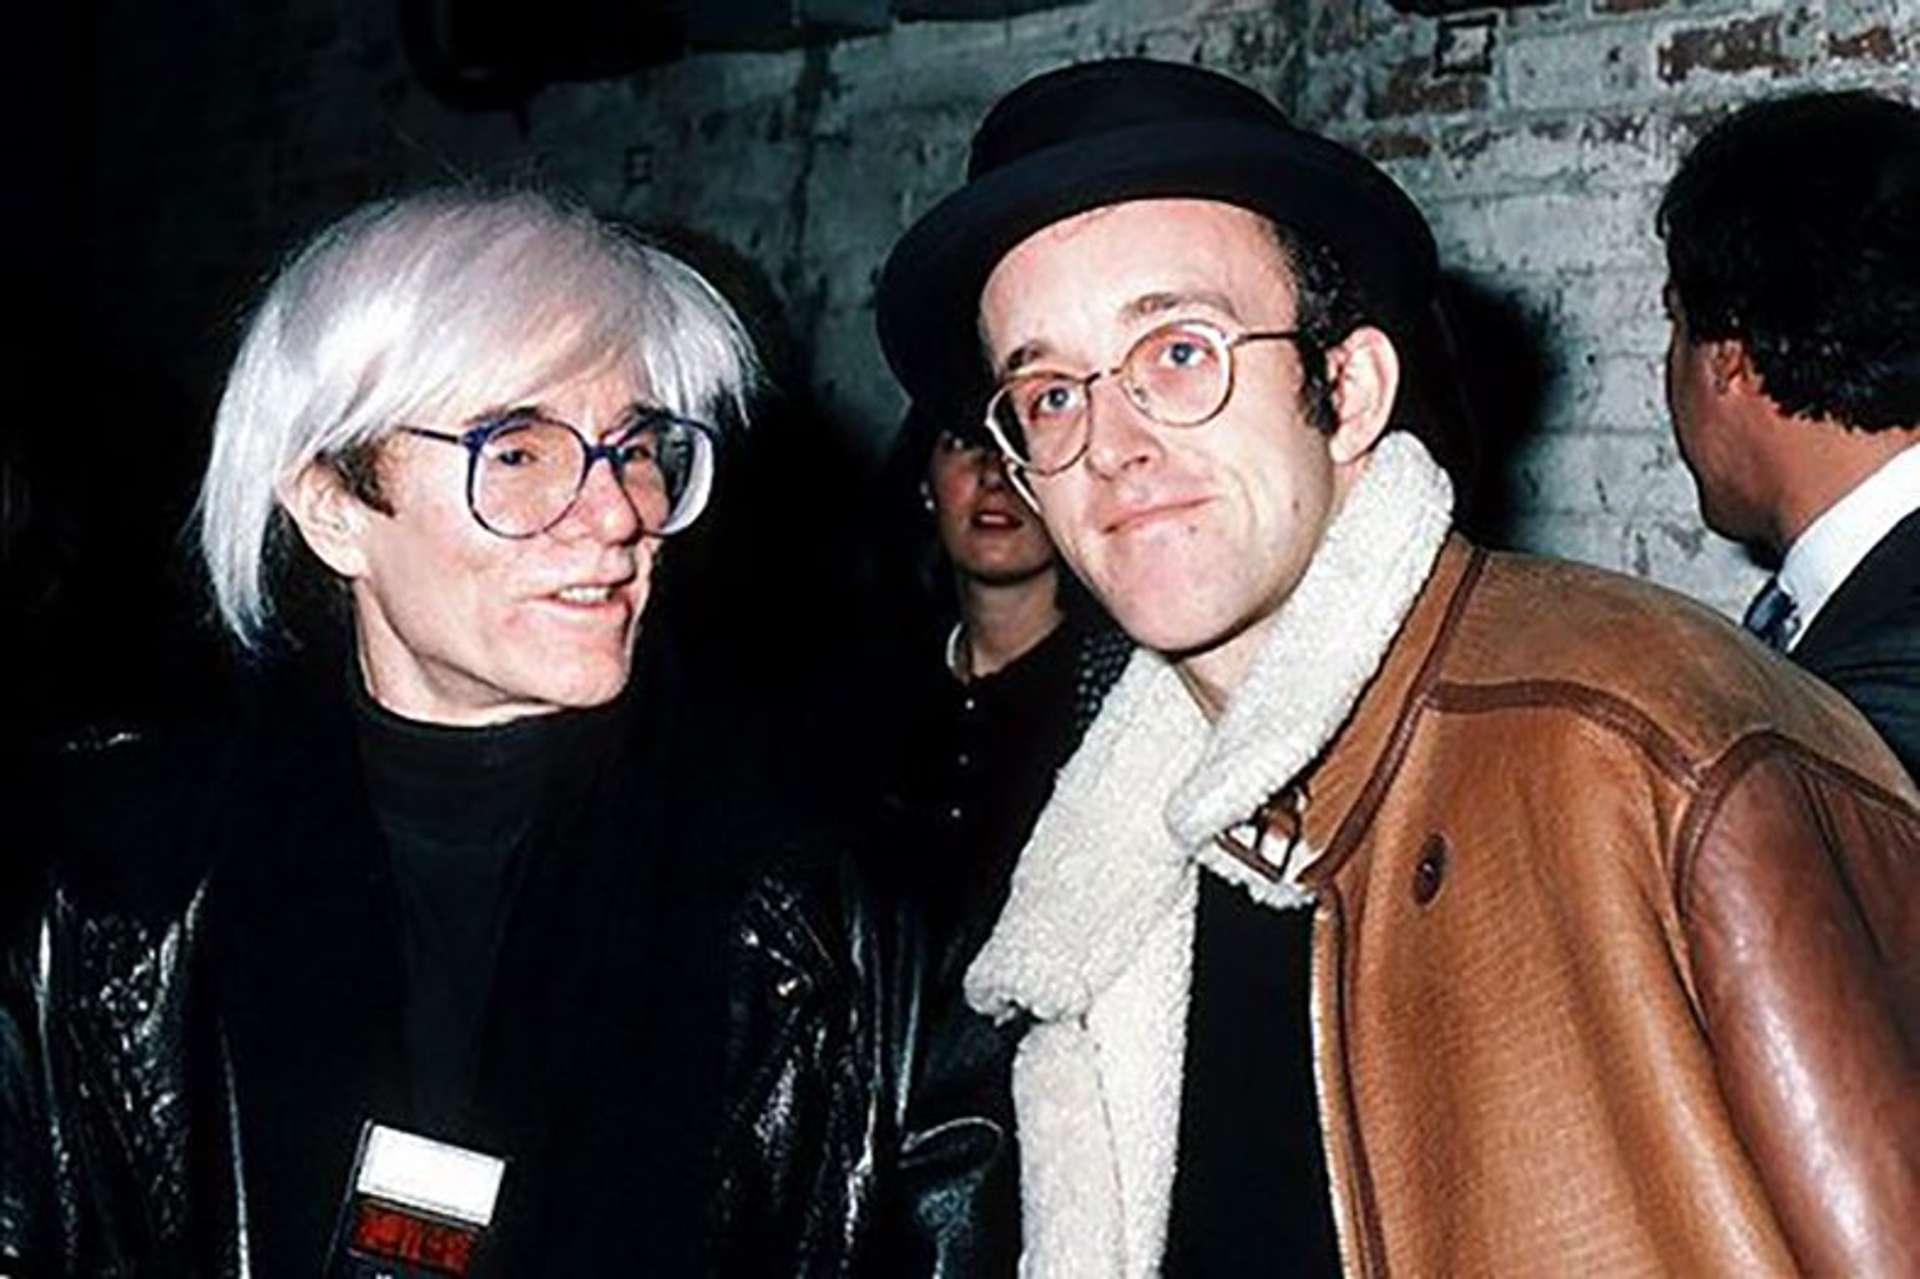 "Andy Warhol And Keith Haring" by klimari1 (JUST SHOOT IT! Photography)